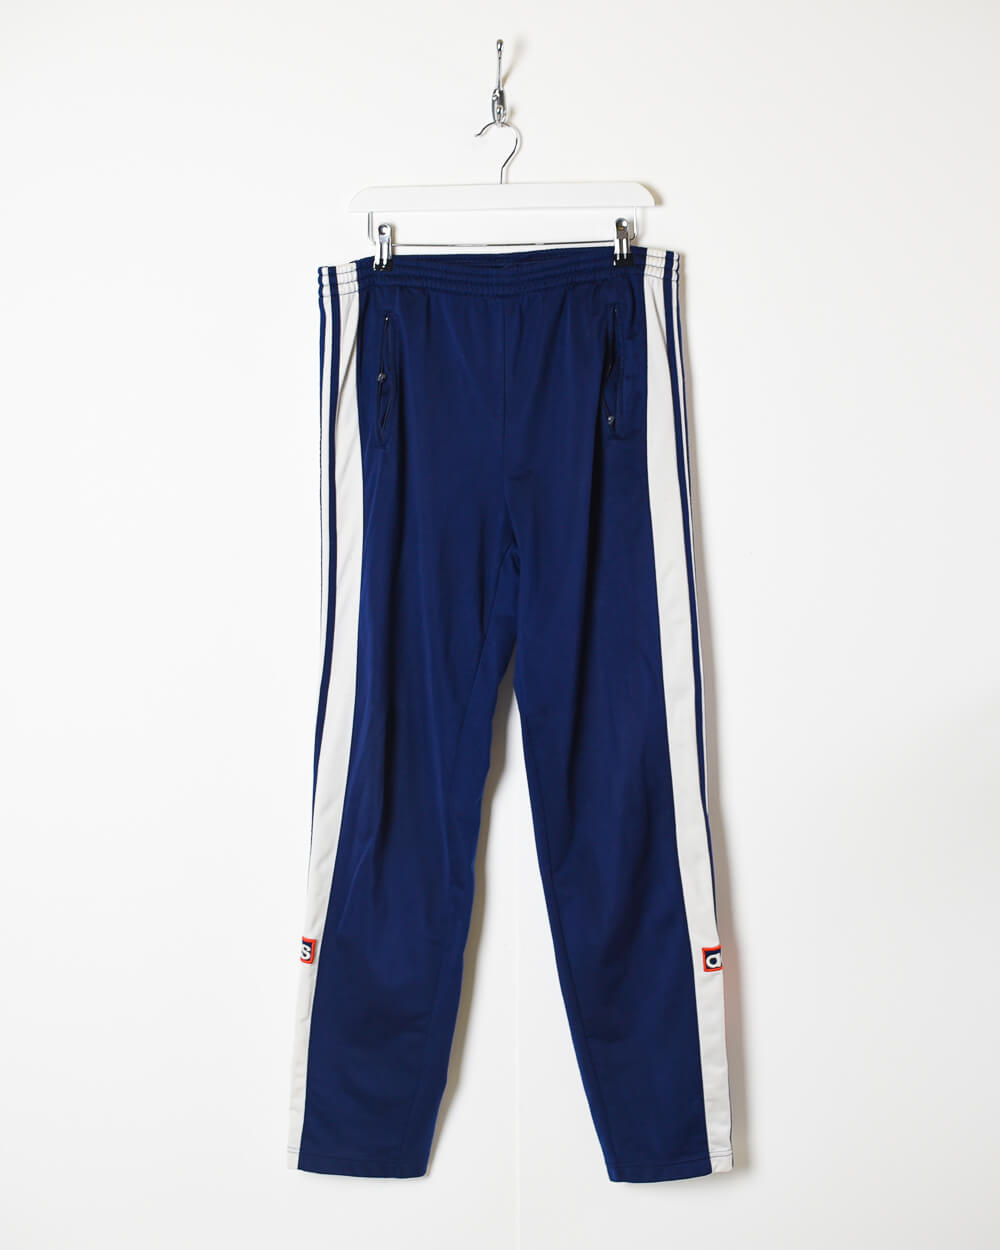 ADIDAS Womens Tracksuit Trousers Joggers UK 40/42 Medium Blue Cotton, Vintage & Second-Hand Clothing Online